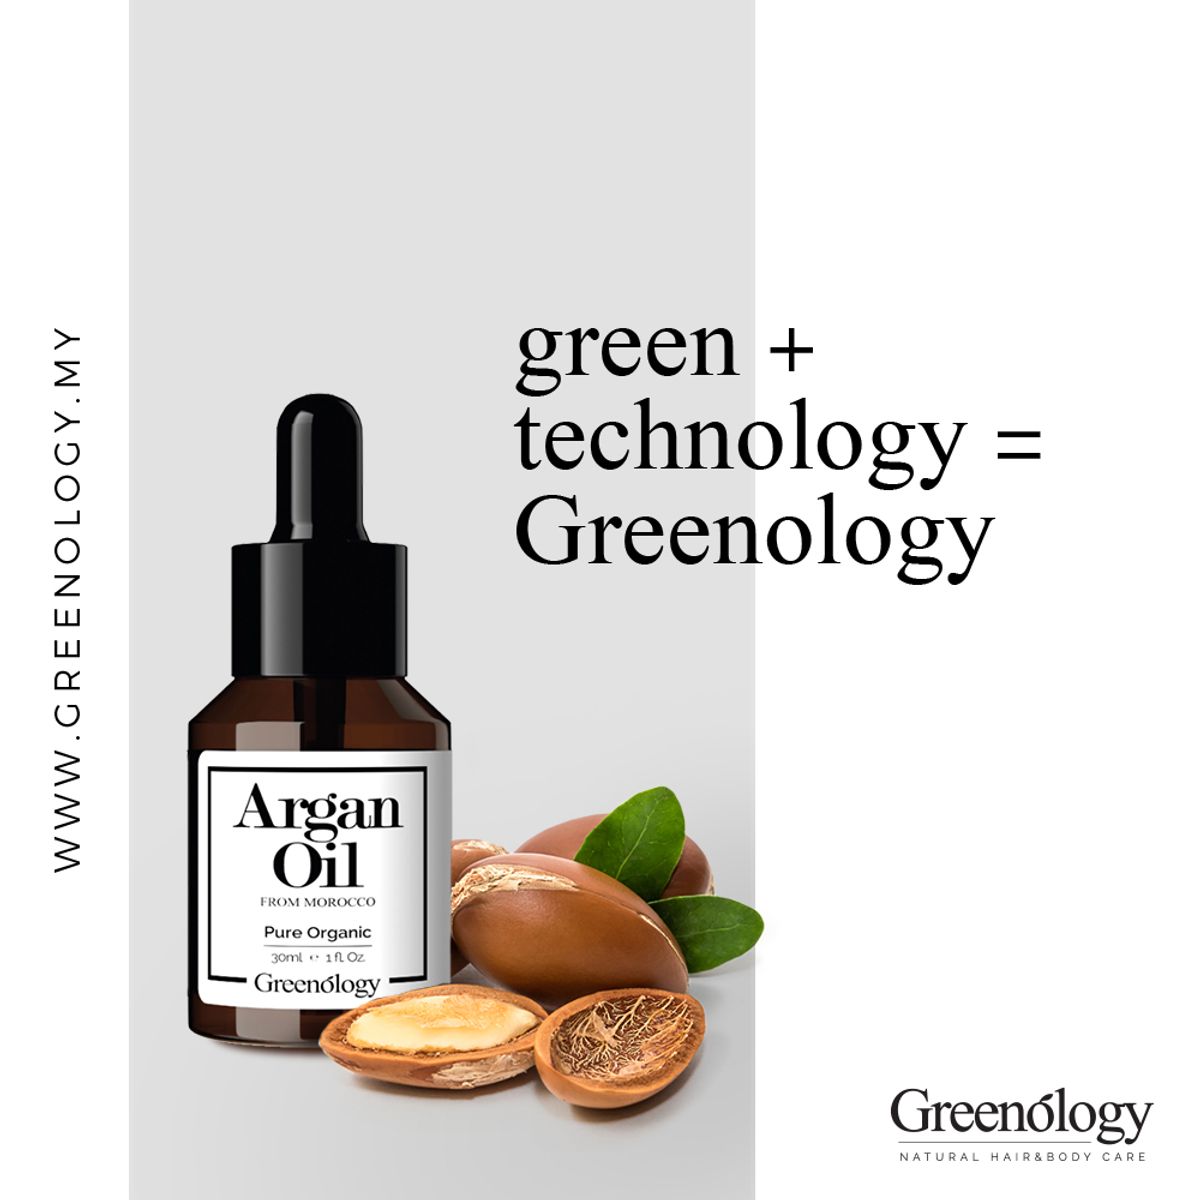 What is Greenology?